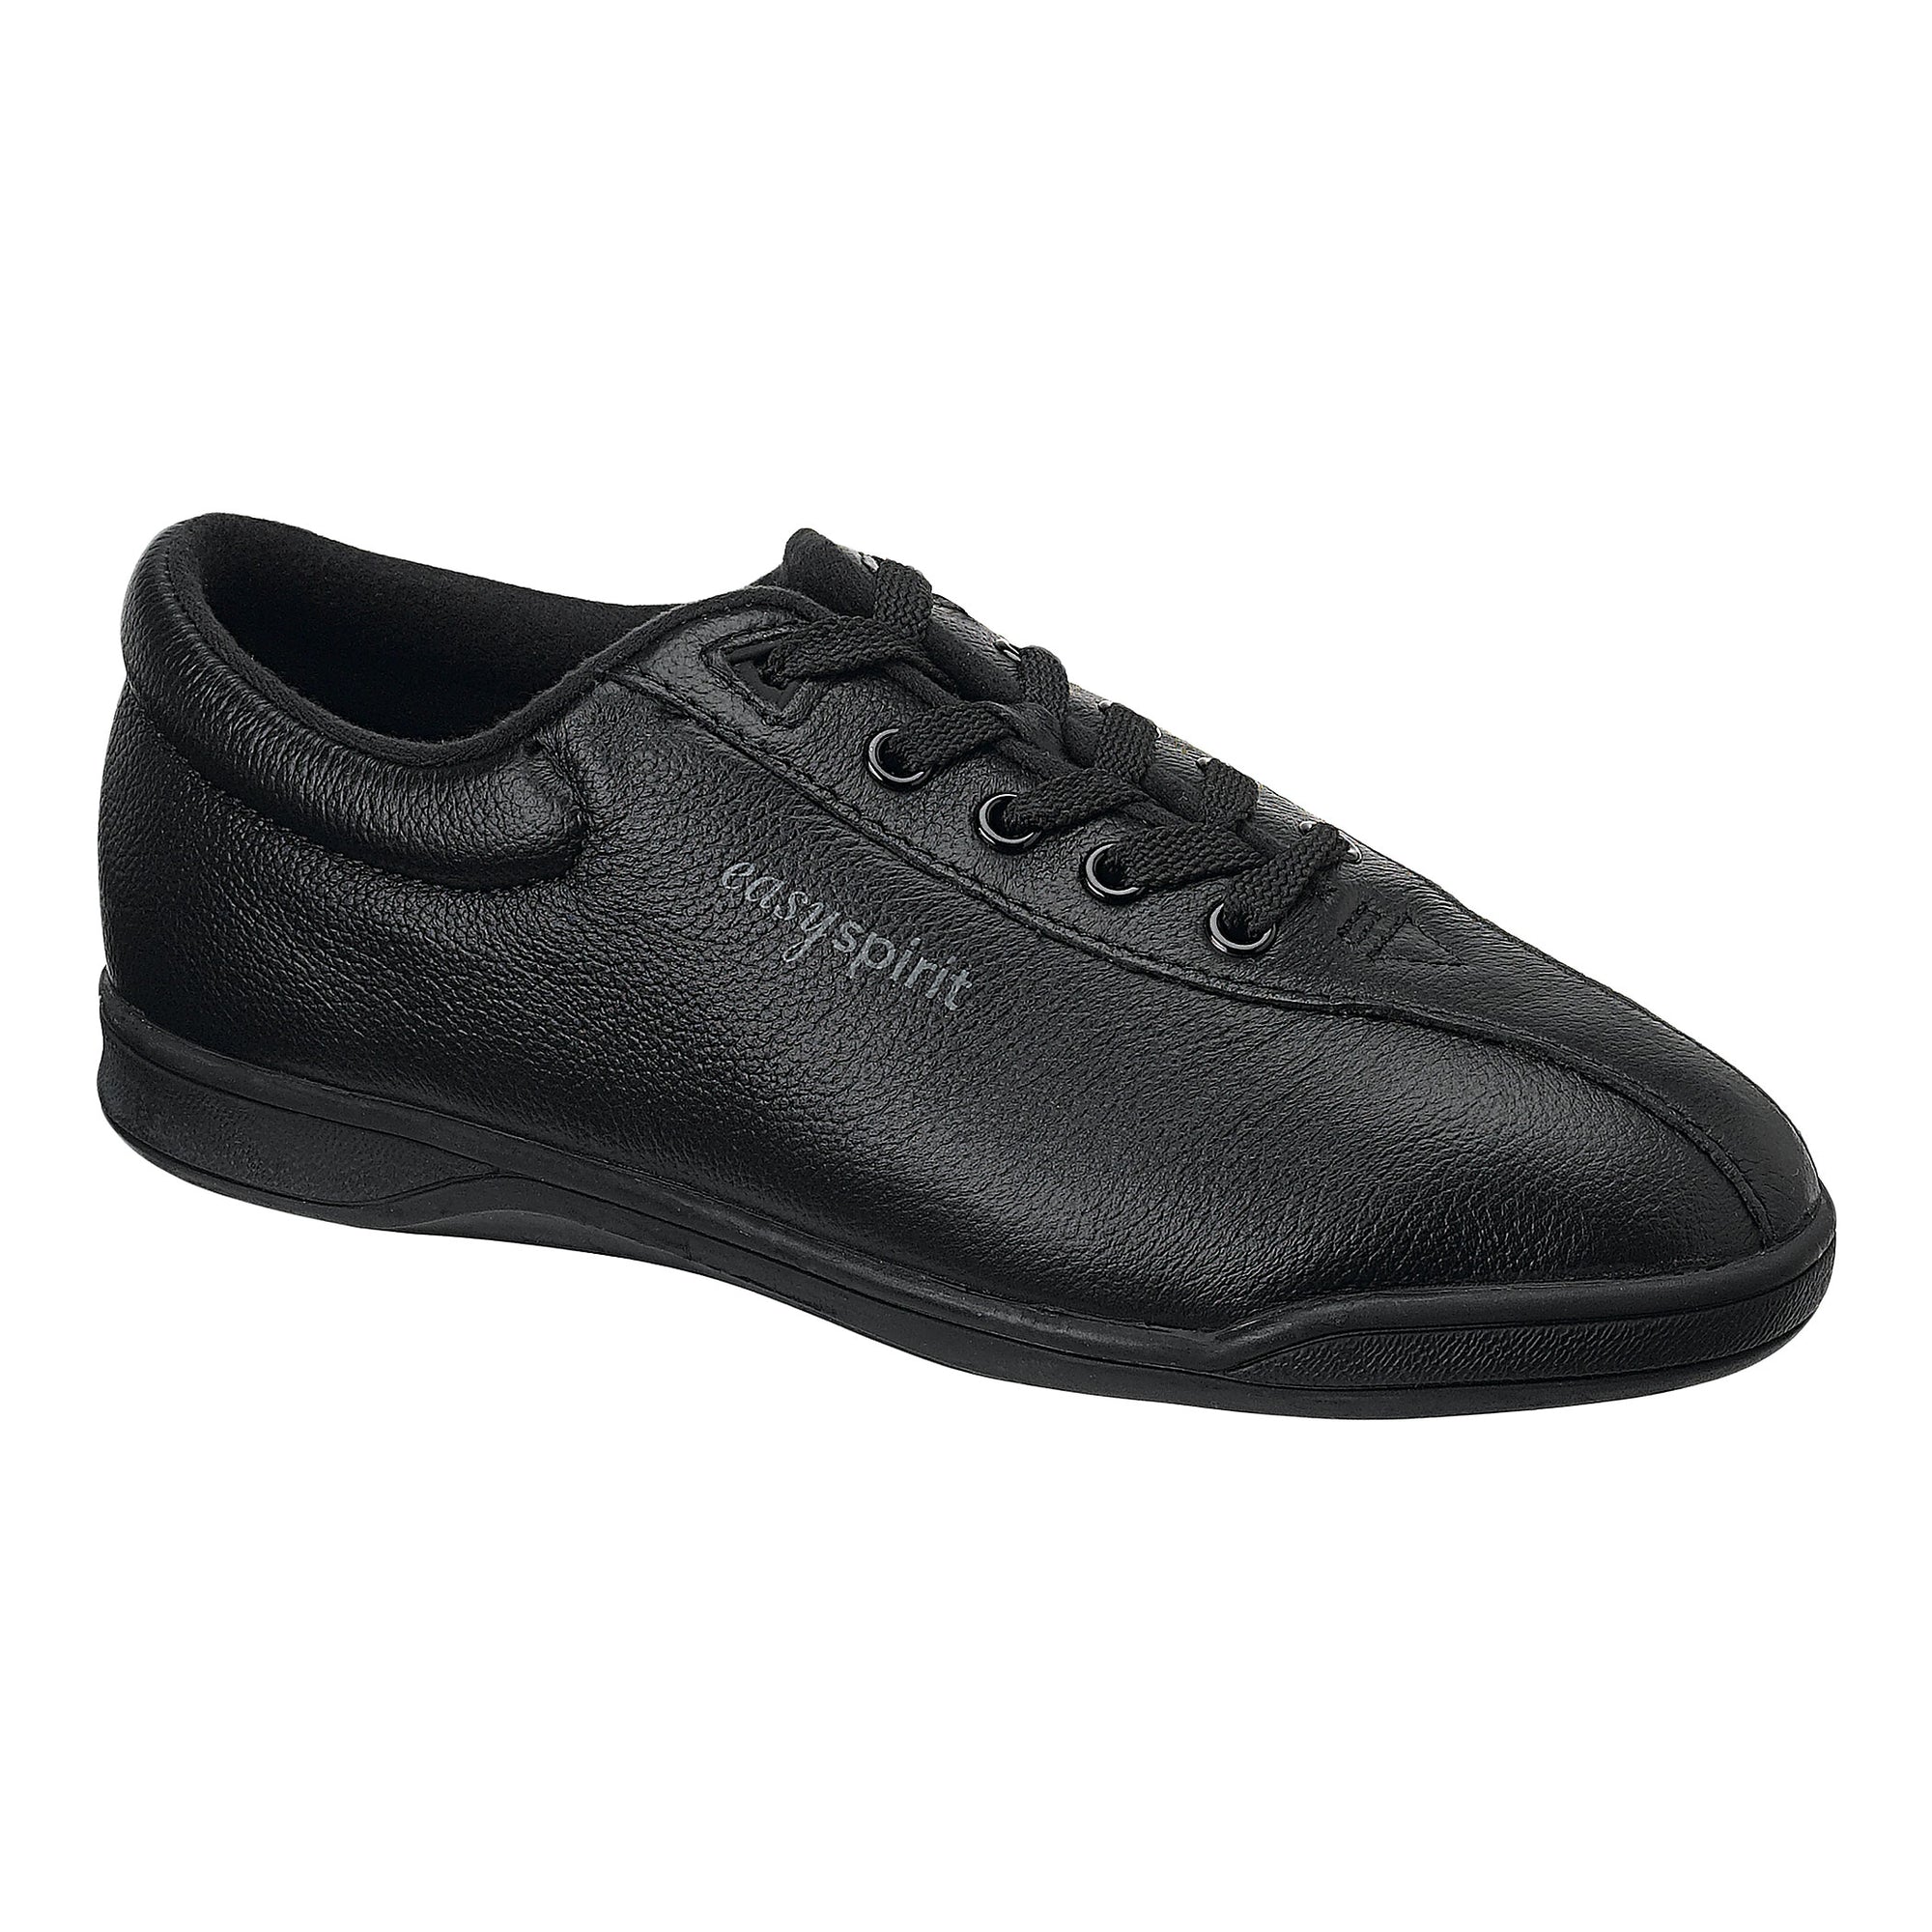 black leather walking shoes